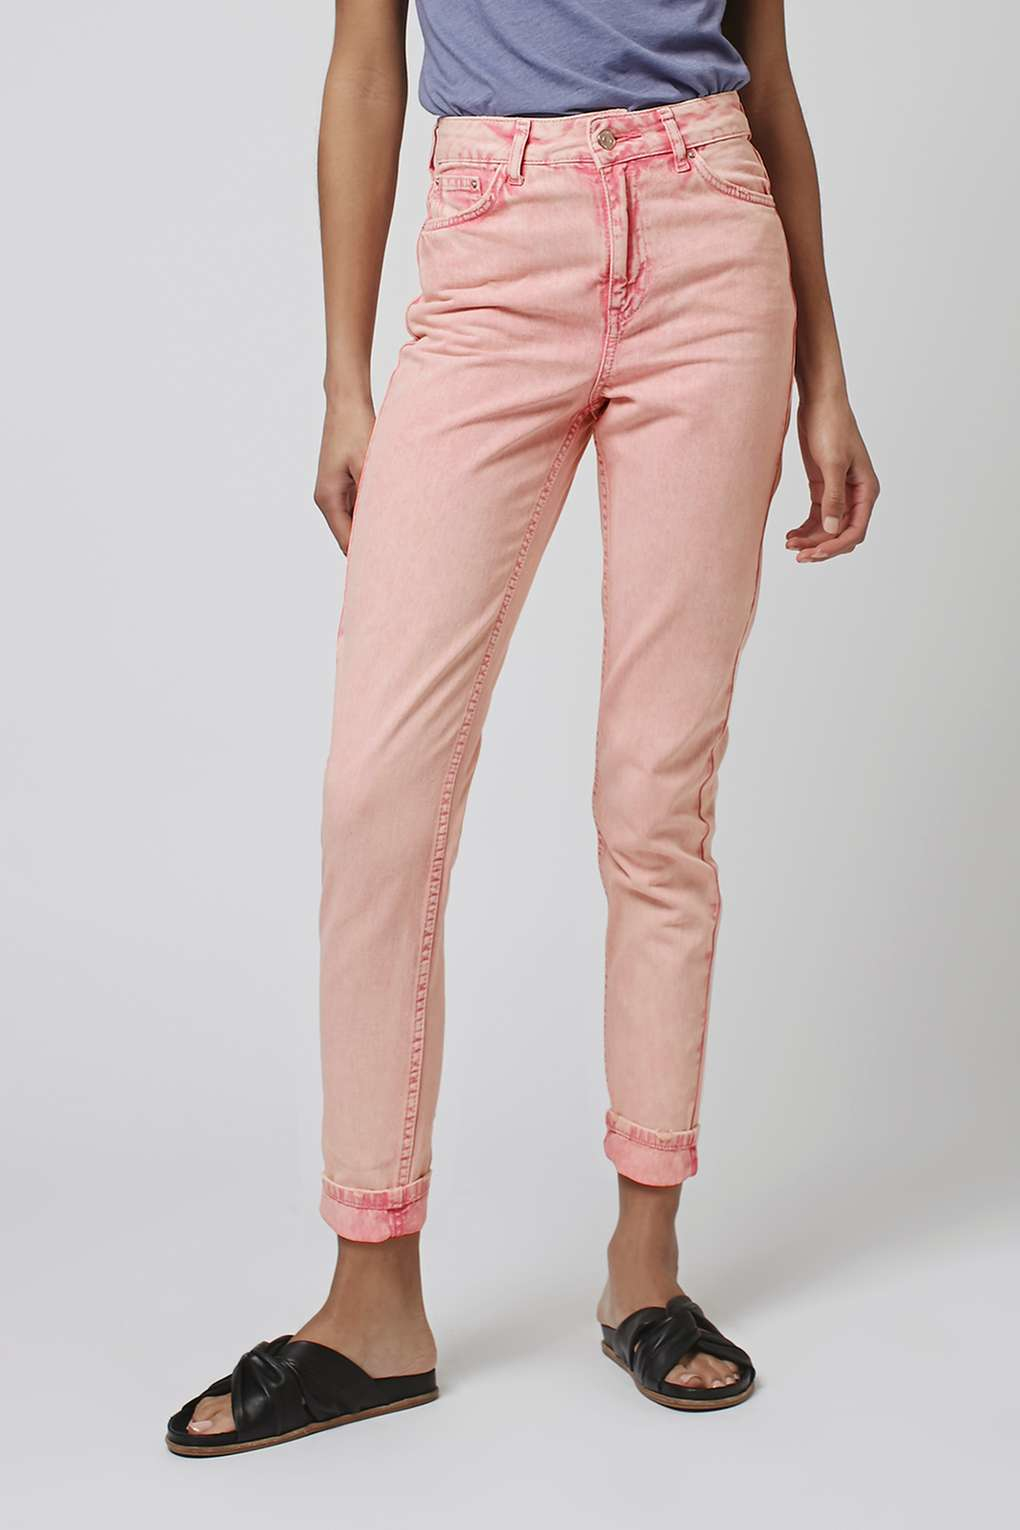 Lyst Moto Pink Acid Mom Jeans in Pink